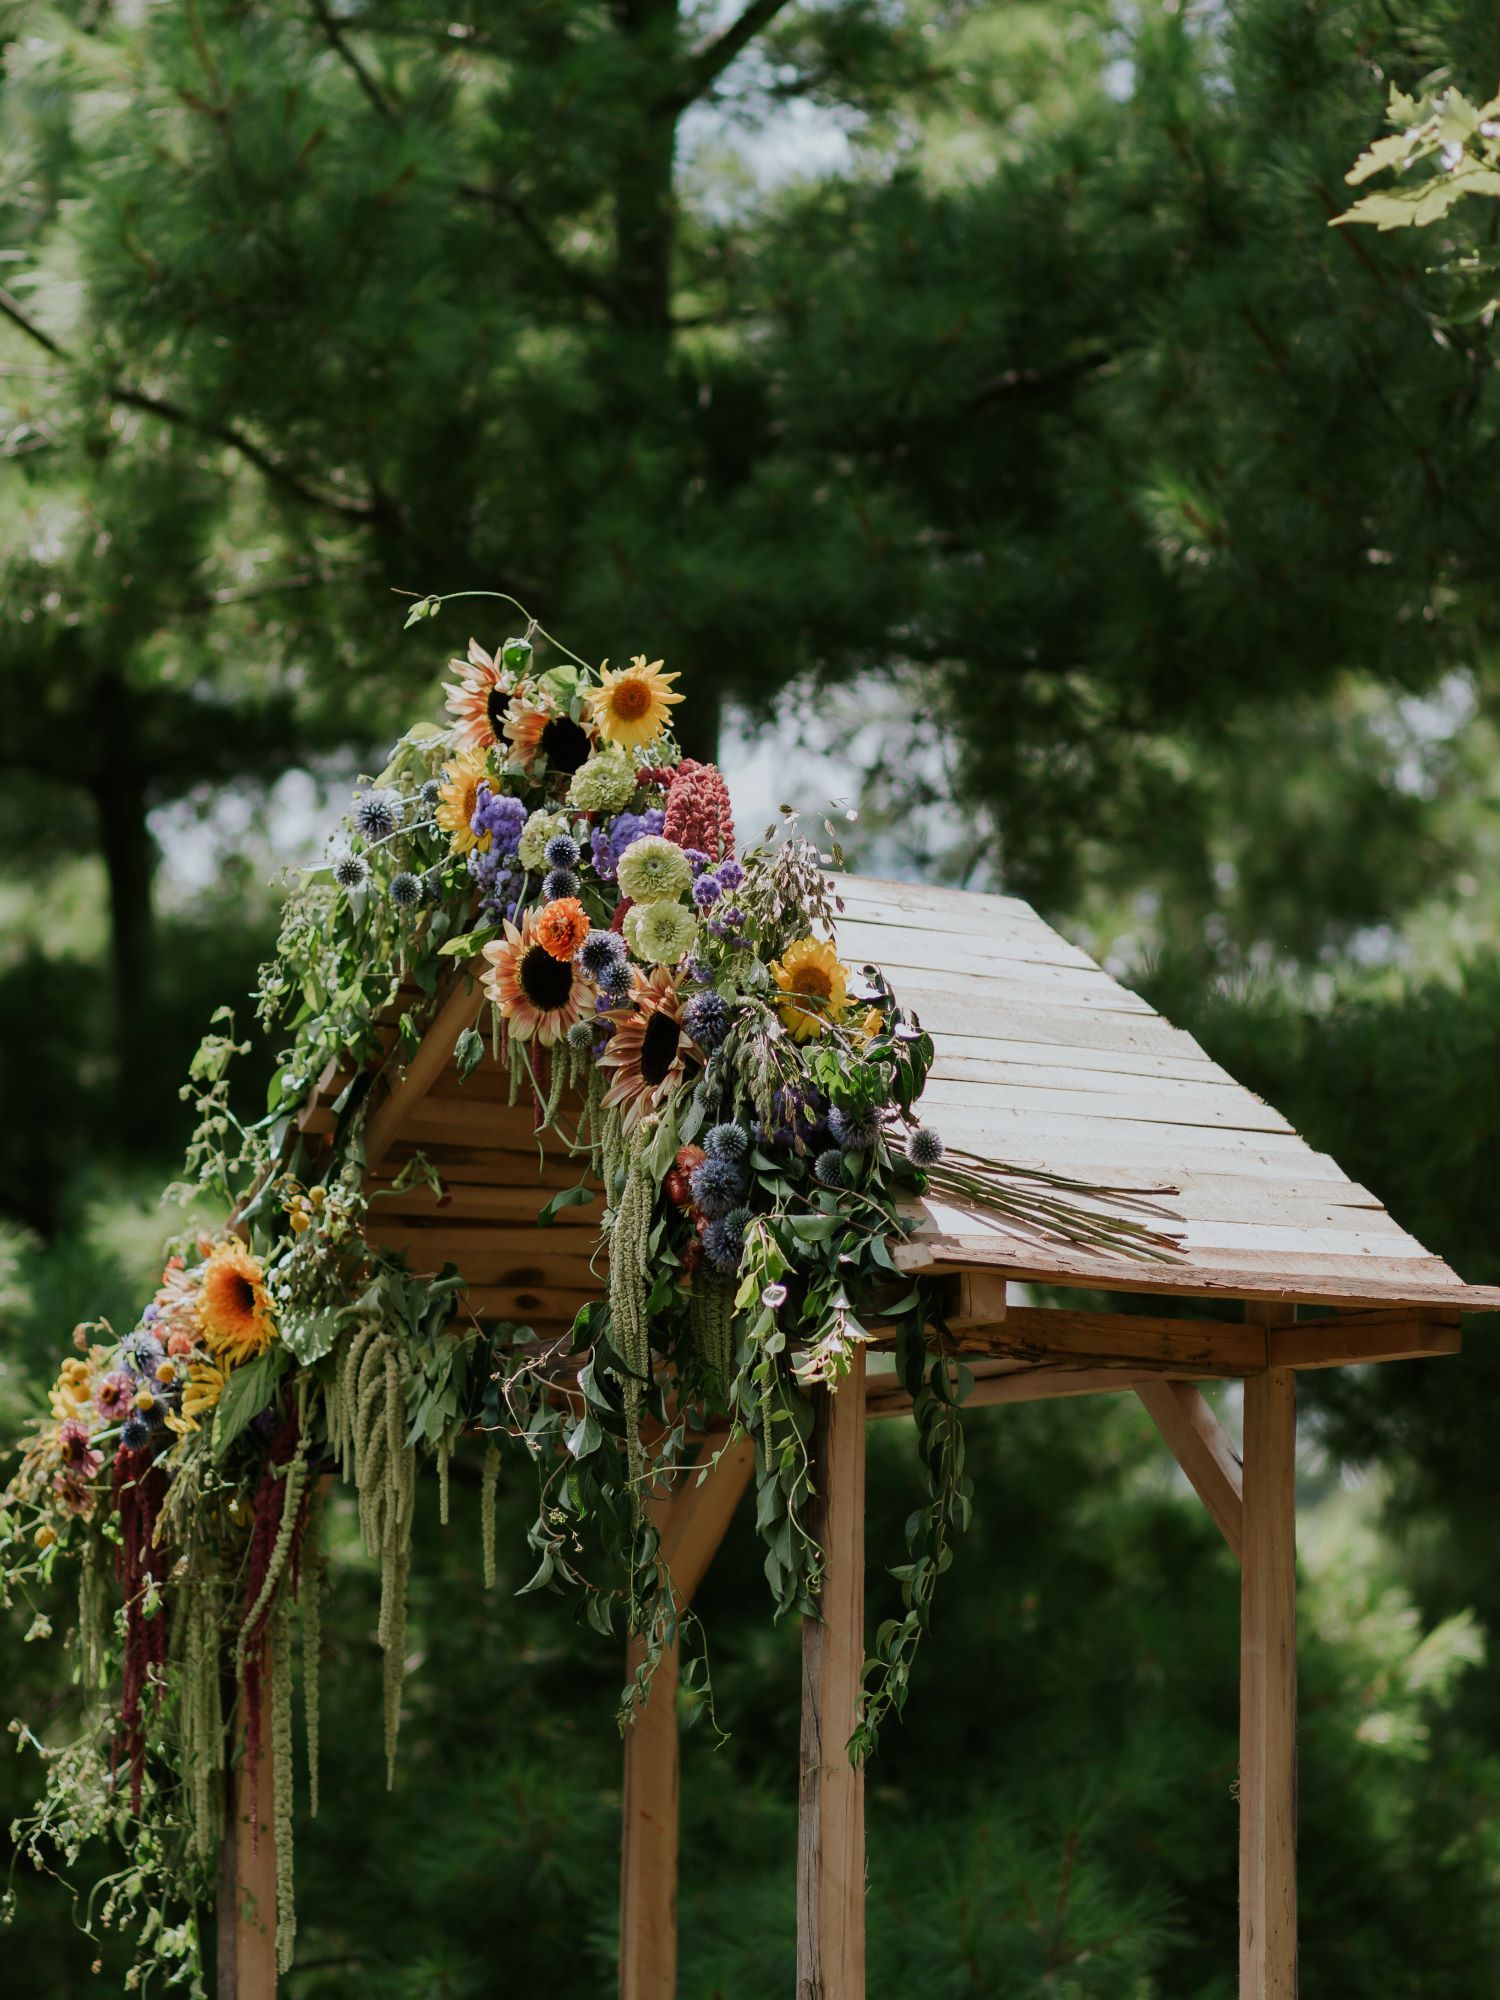 An arbor decorated with flowers for an ourdoor wedding